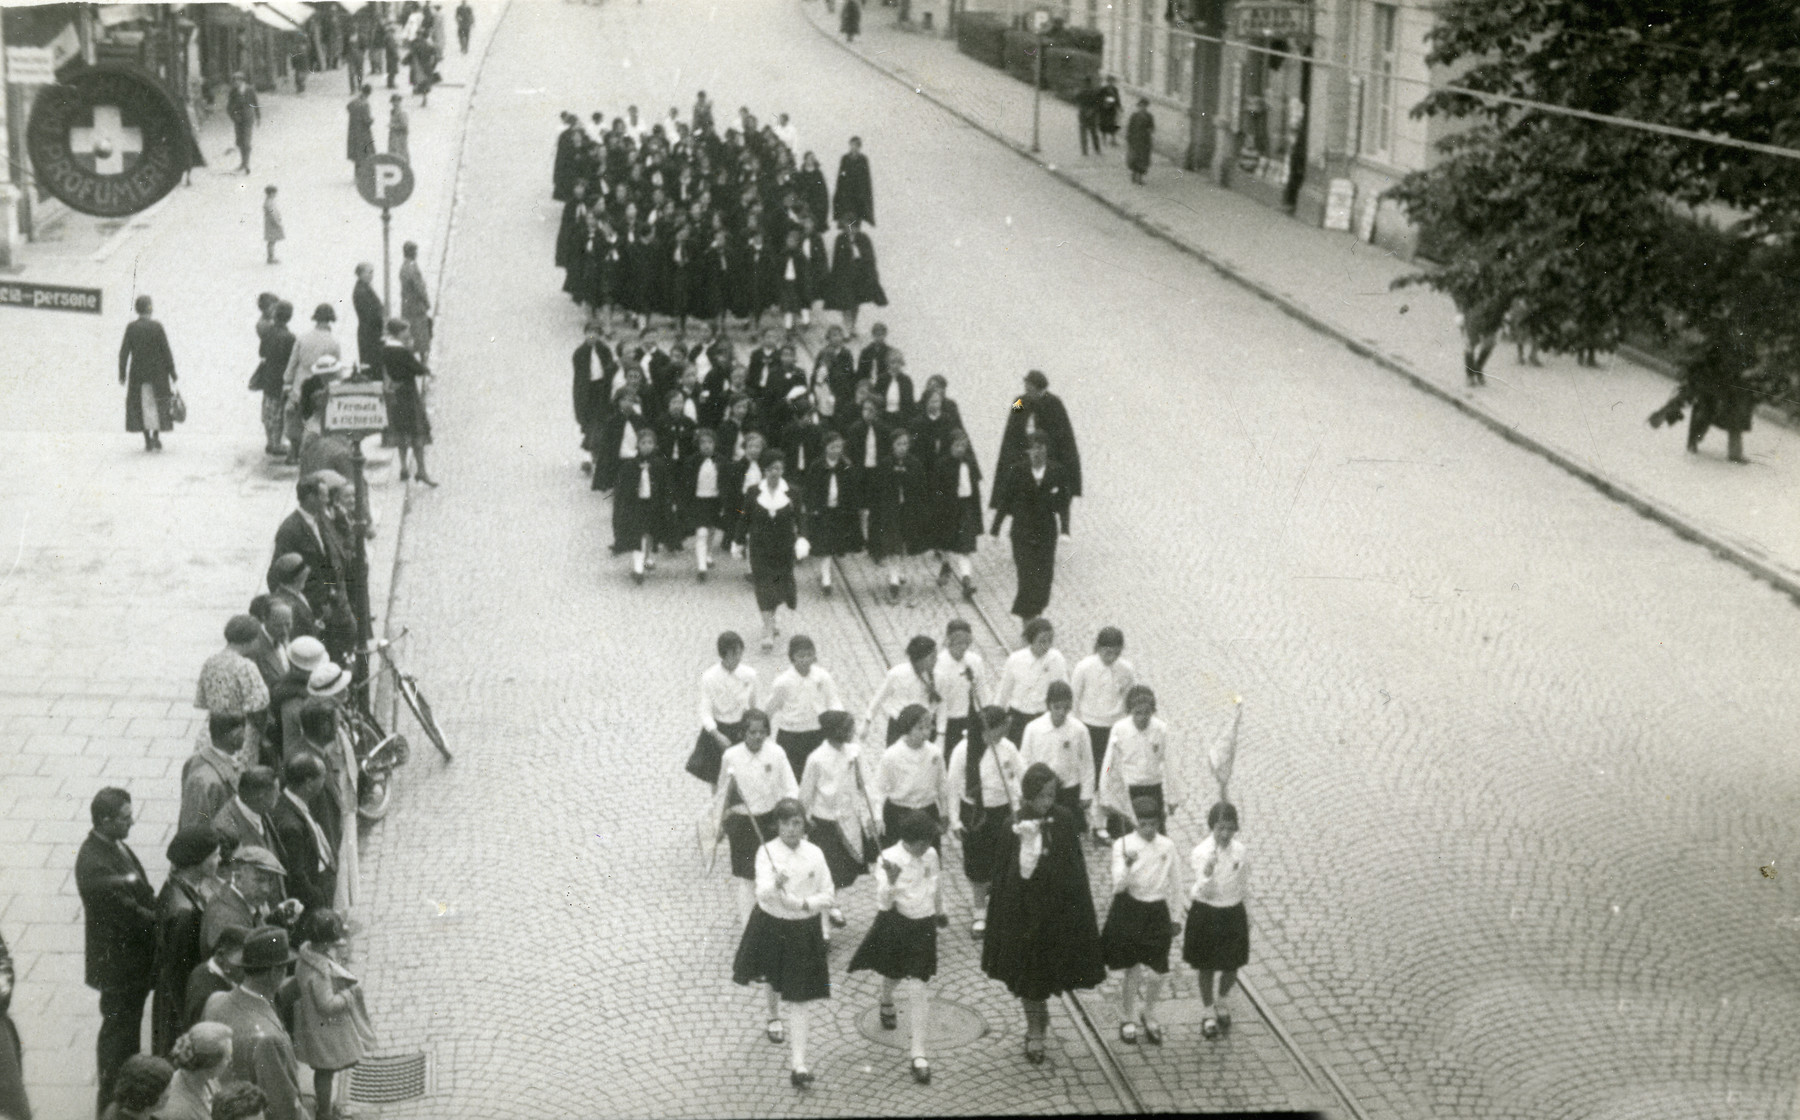 Members of the Fascist Youth movement Picolo Italiana march down a street in Merano in honor of Mussolini.

Among those pictured is Anna Kohn (membership in the organization was obligatory at that time; even for Jews).